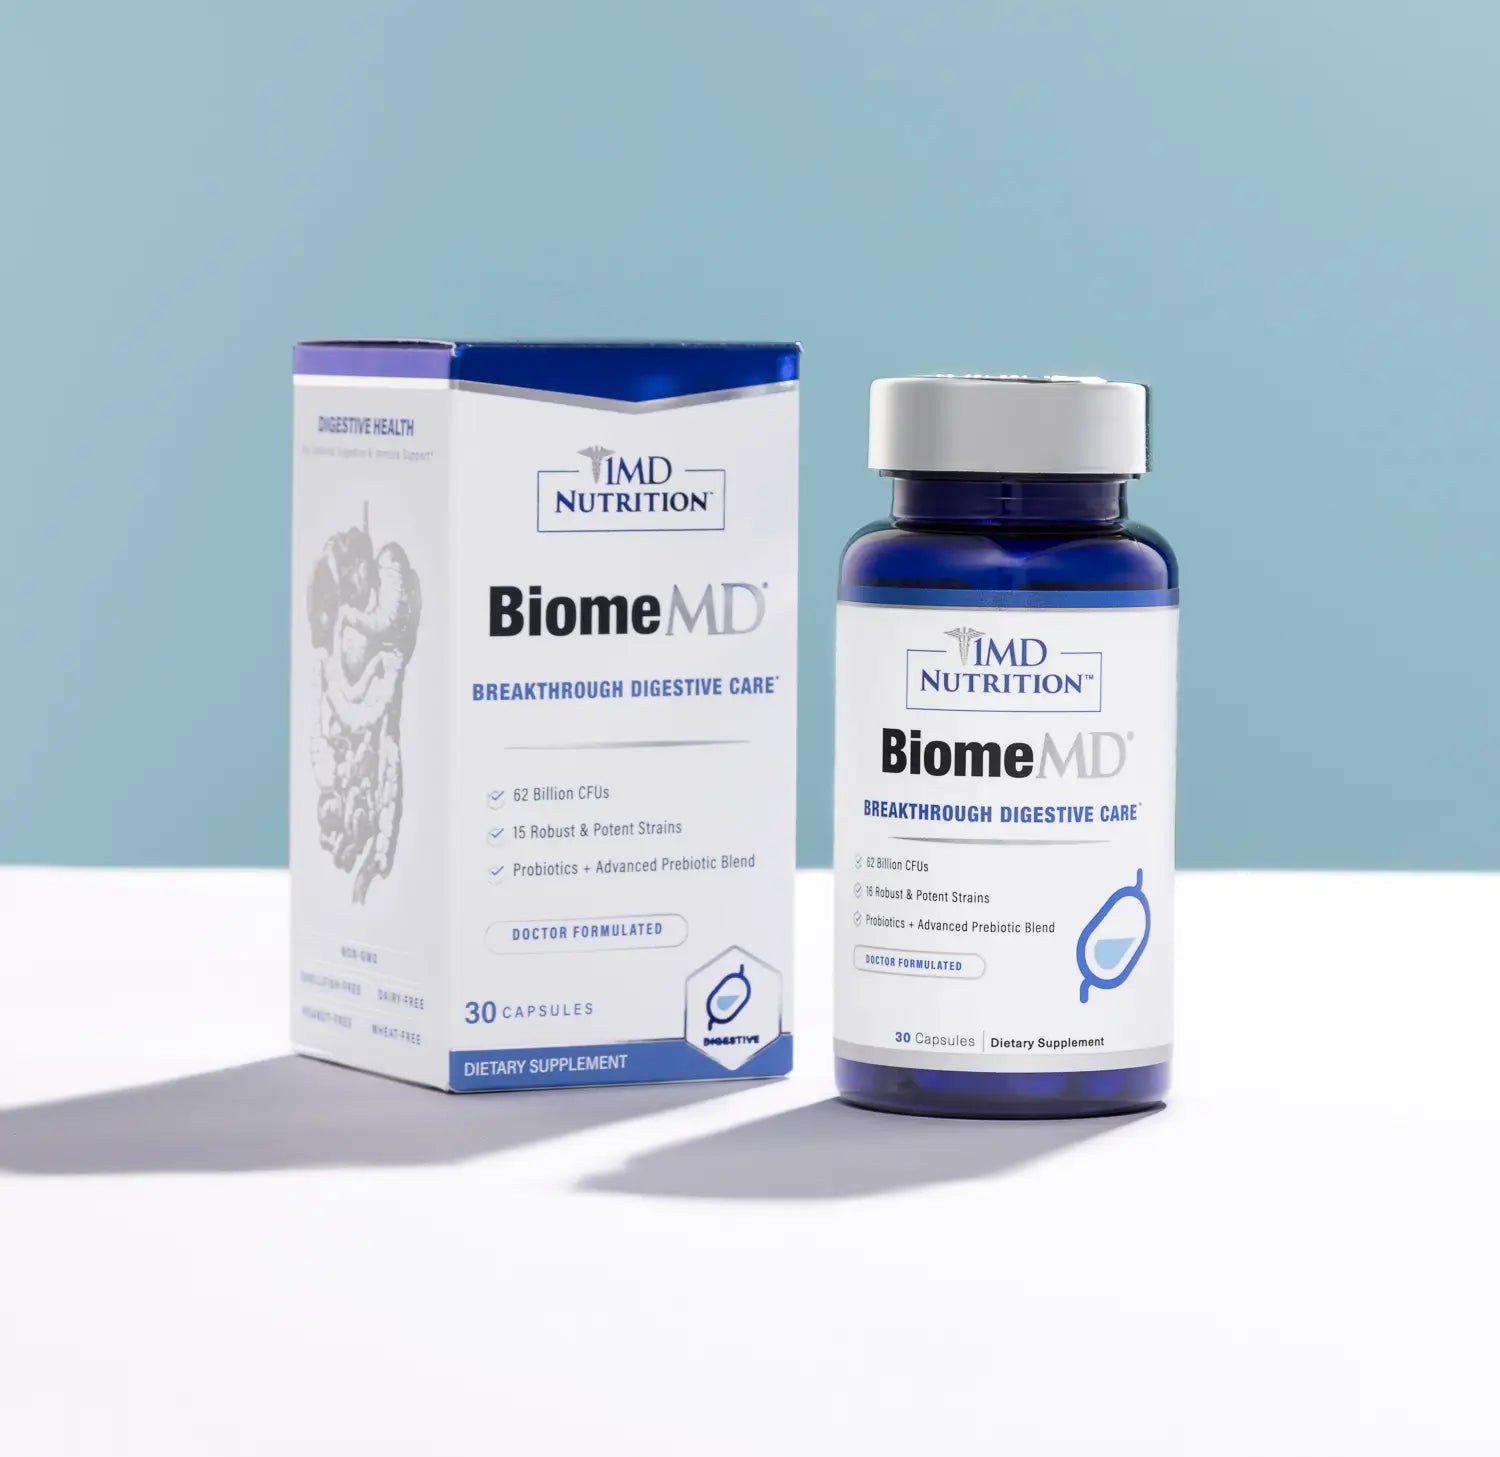 1MD Nutrition BiomeMD box and bottle